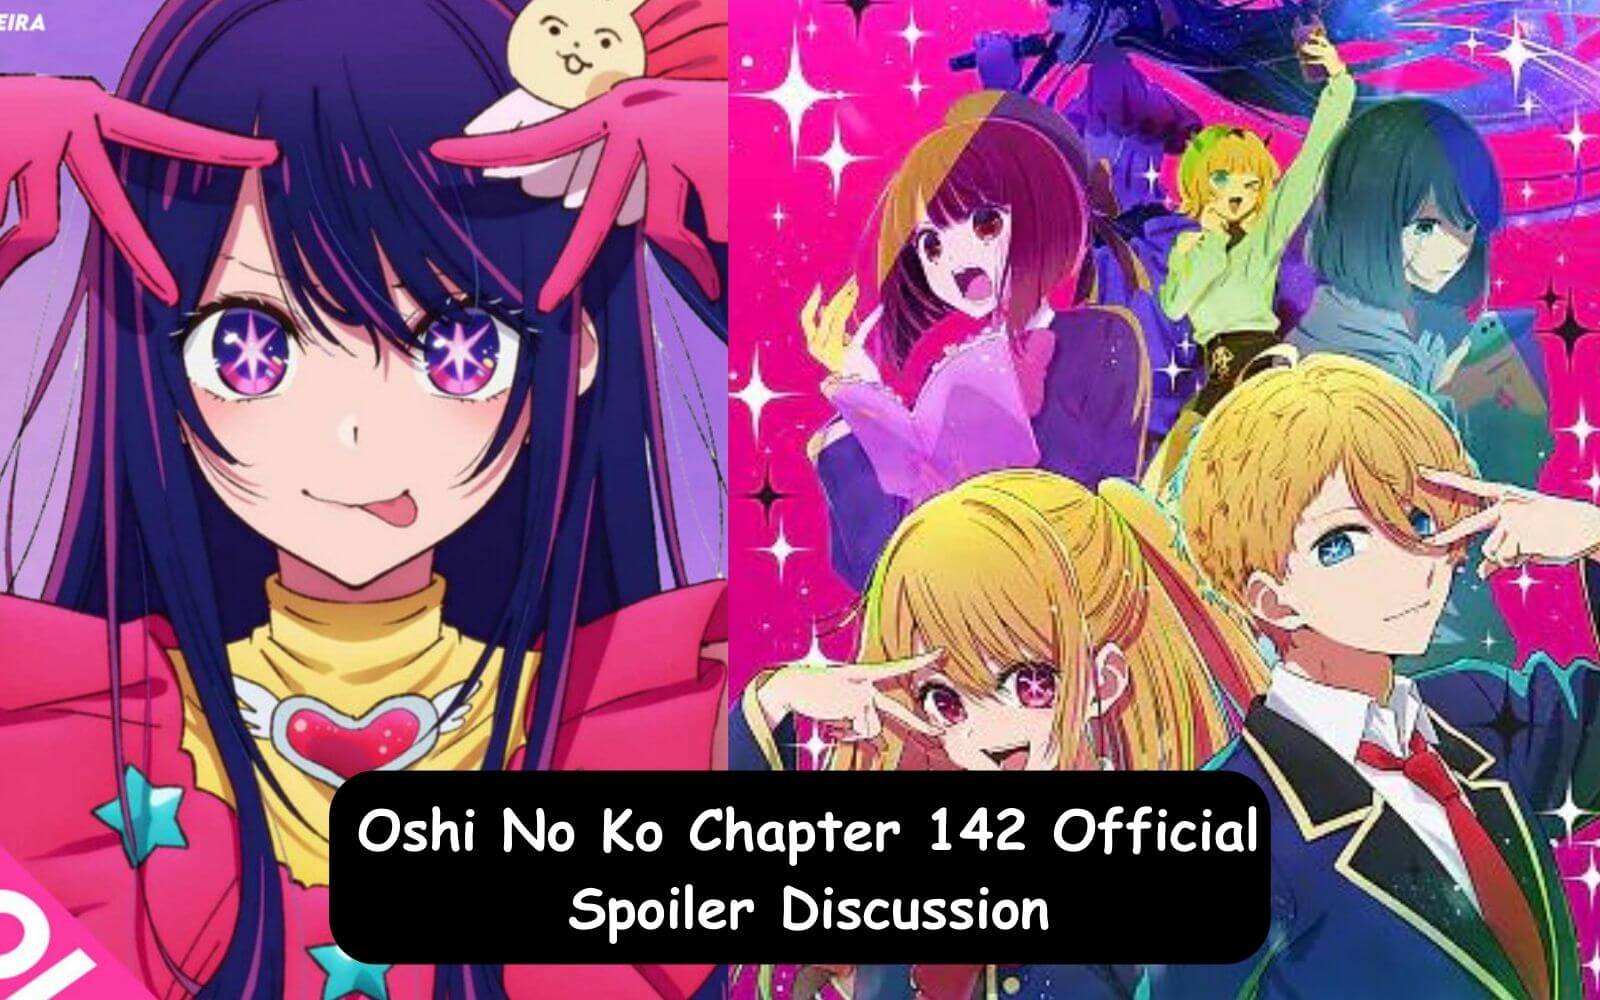 Oshi No Ko Chapter 142 Official Spoiler Discussion